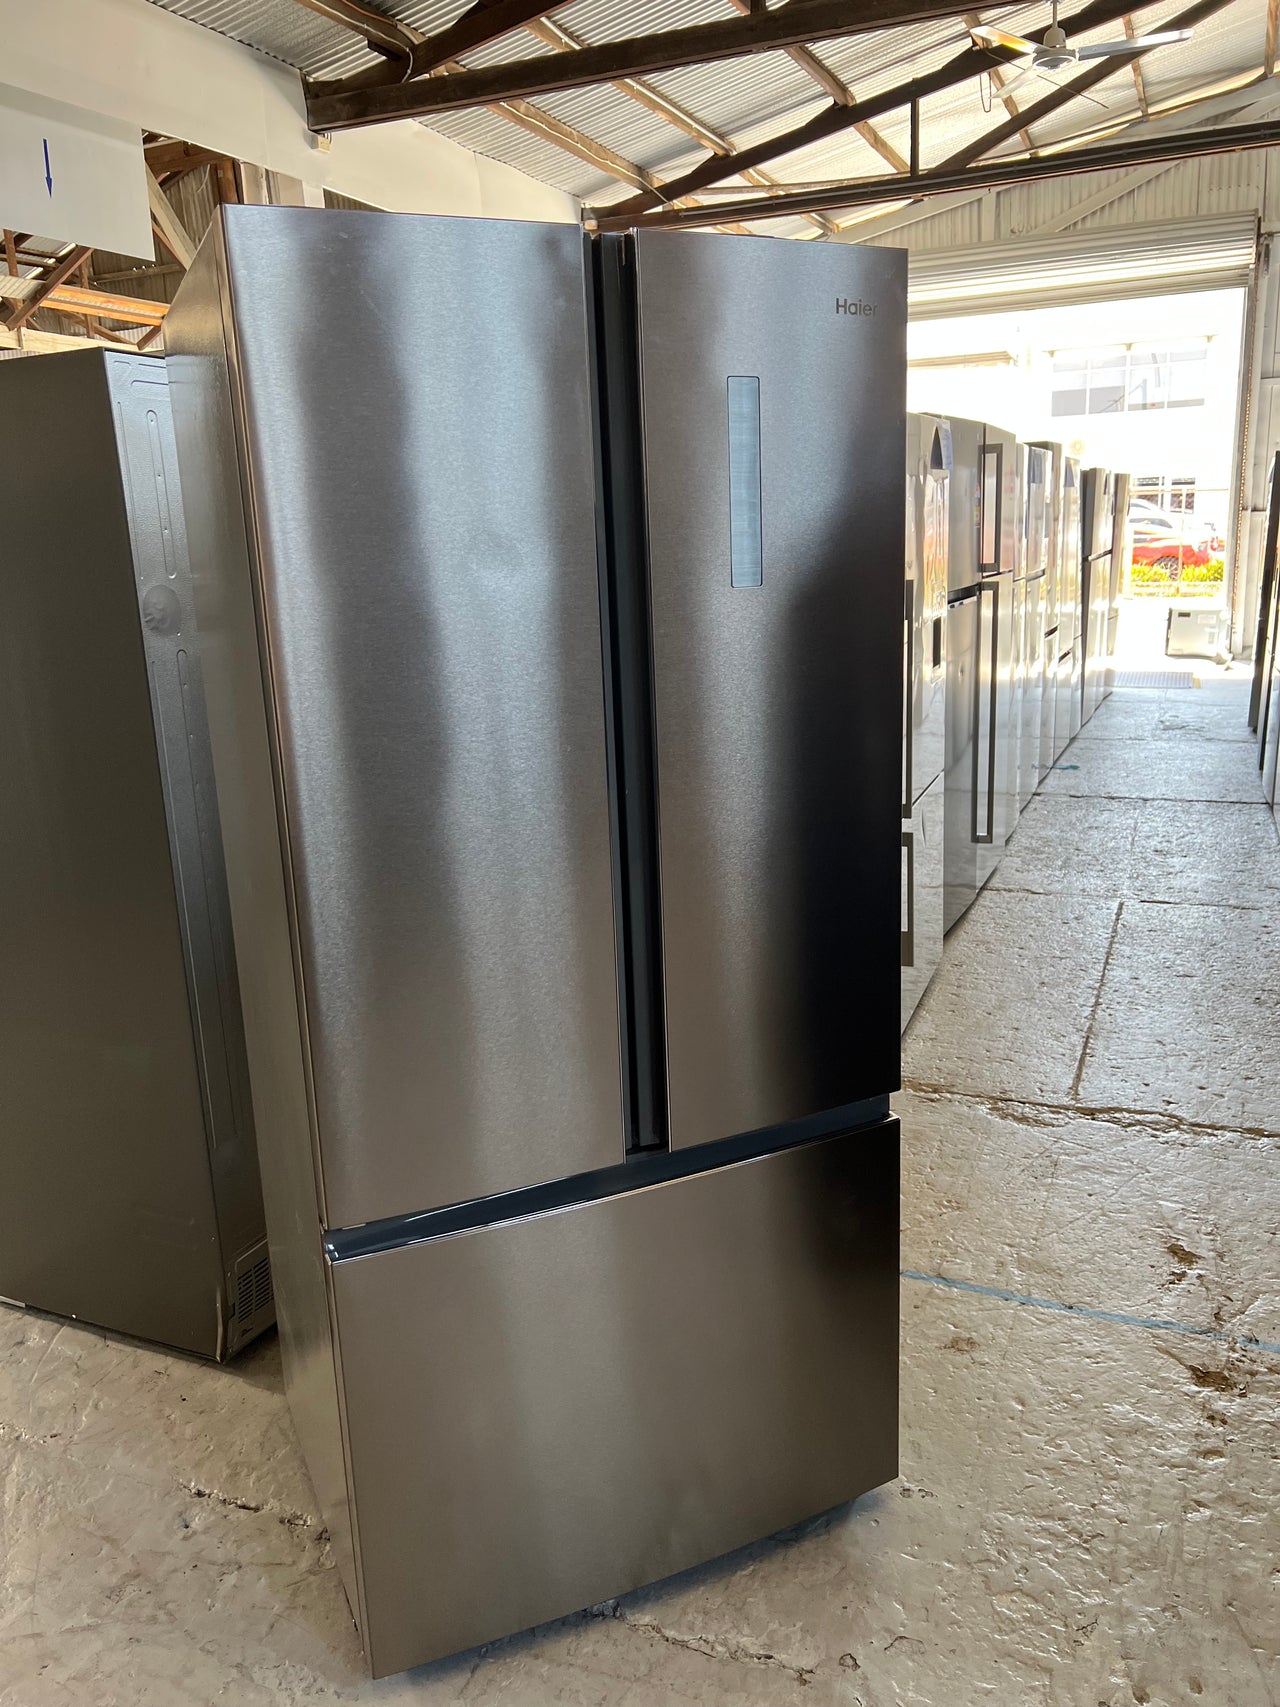 Factory second Haier 493L French Door Frost Free Fridge Stainless Steel HRF520FS/ 4.5 star energy - Second Hand Appliances Geebung